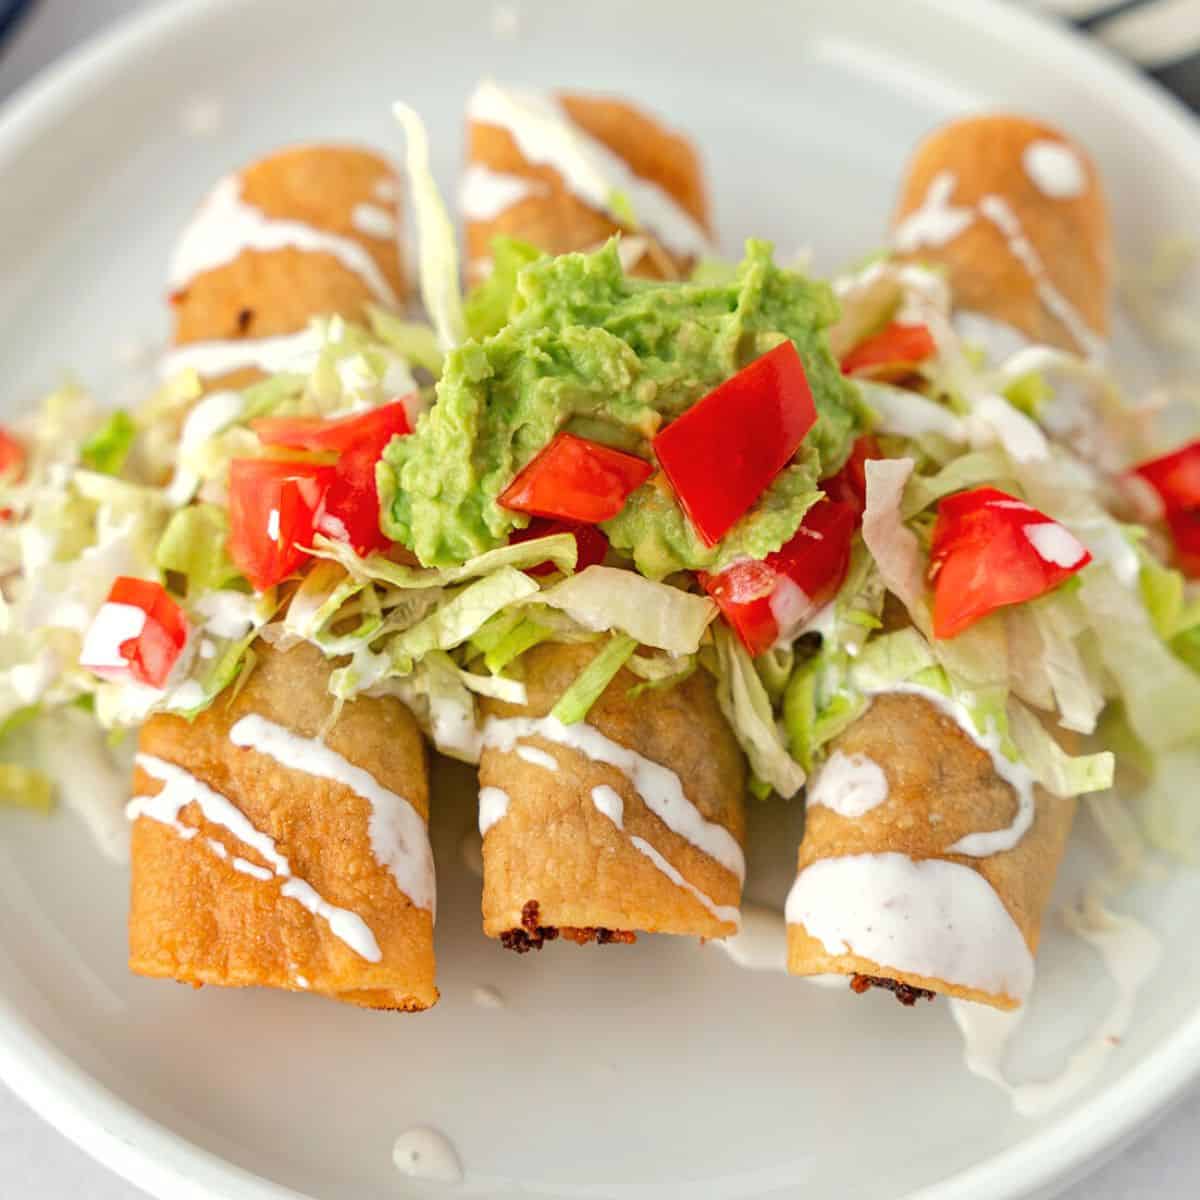 Ground Beef Taquitos (Baked or Fried)